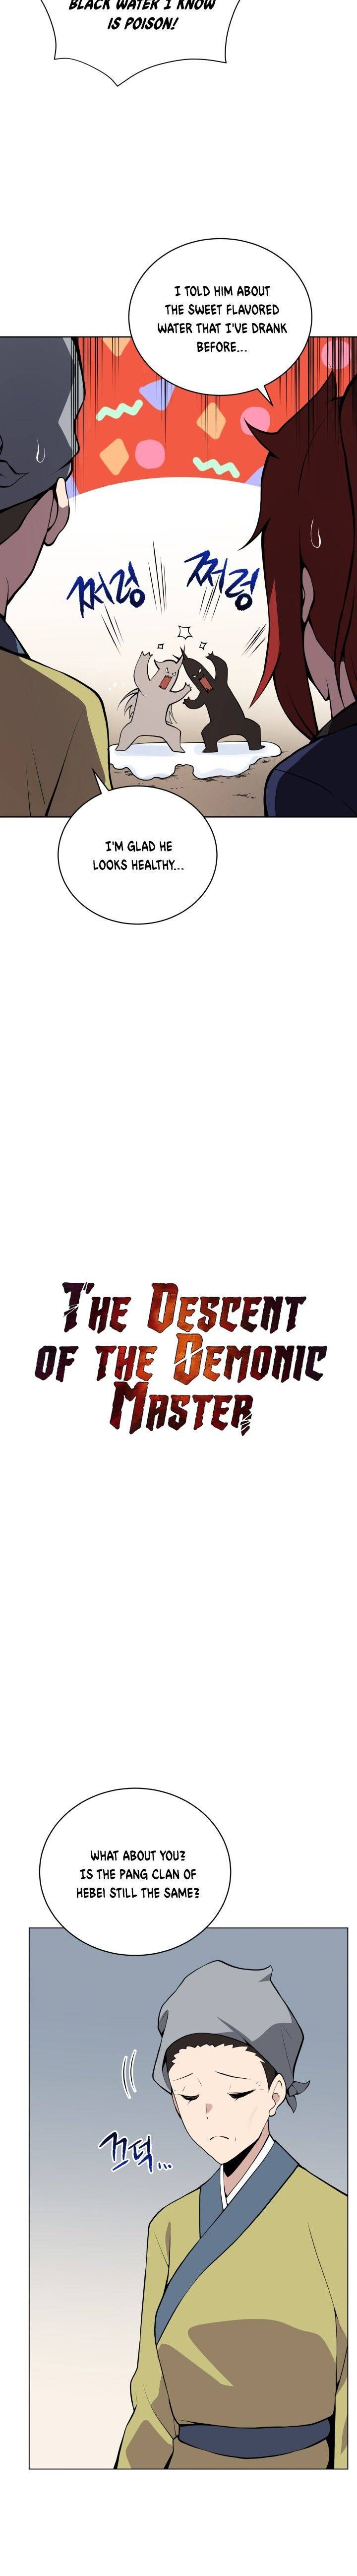 the_descent_of_the_demonic_master_98_3